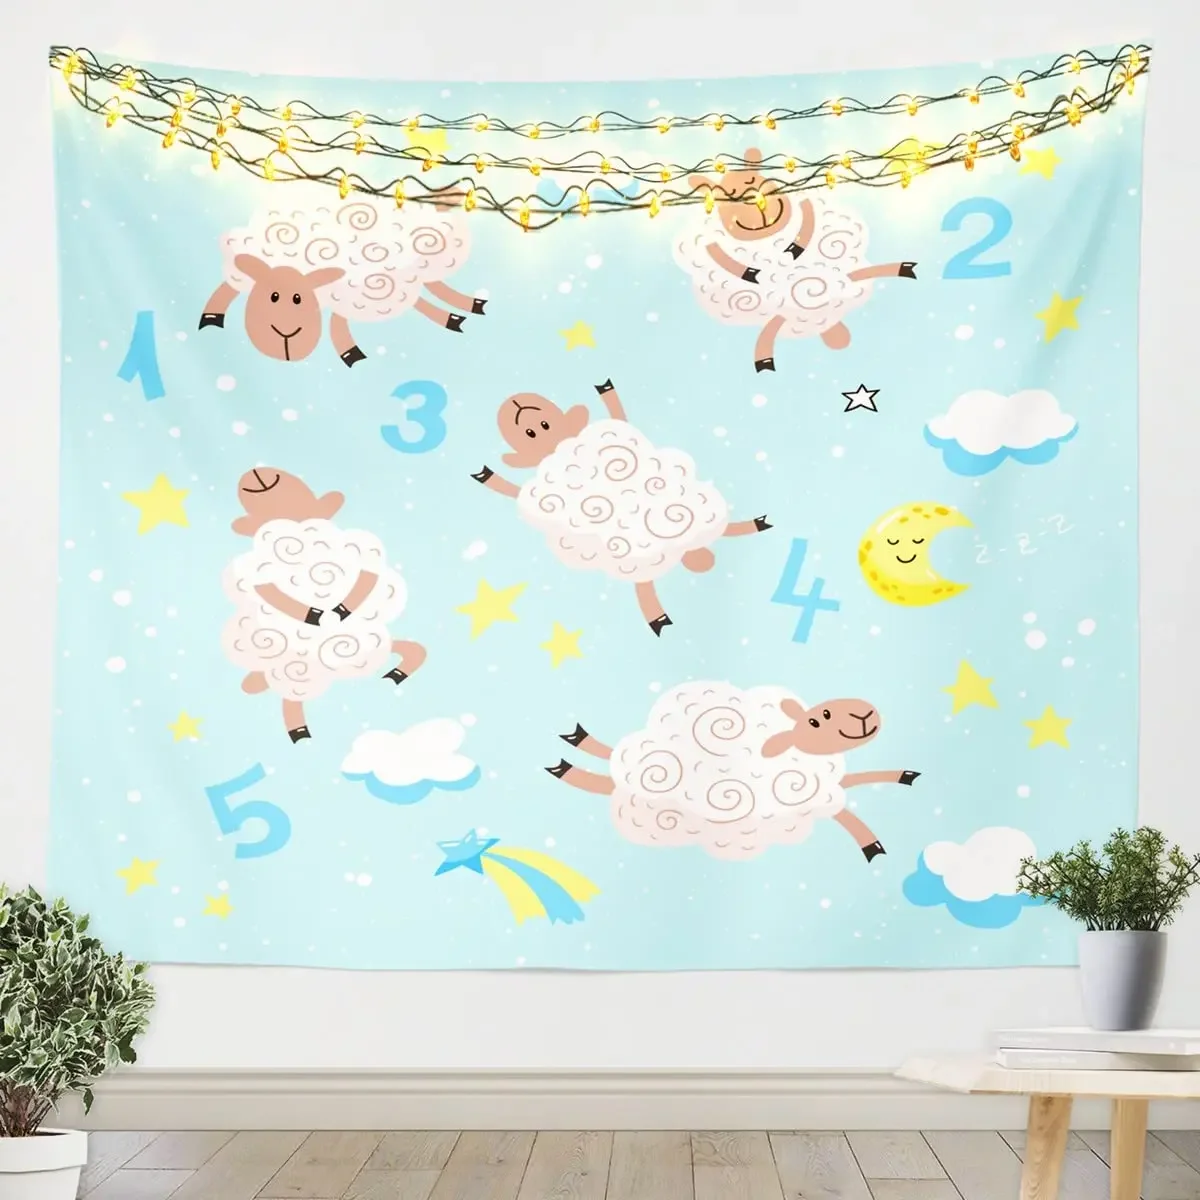 

Cartoon Sheep Tapestry Counting Sheep Sleep Tapestry Moon Cloud Sky Tapestries Wall Hanging Decor for Dorm Bedroom LIving Room